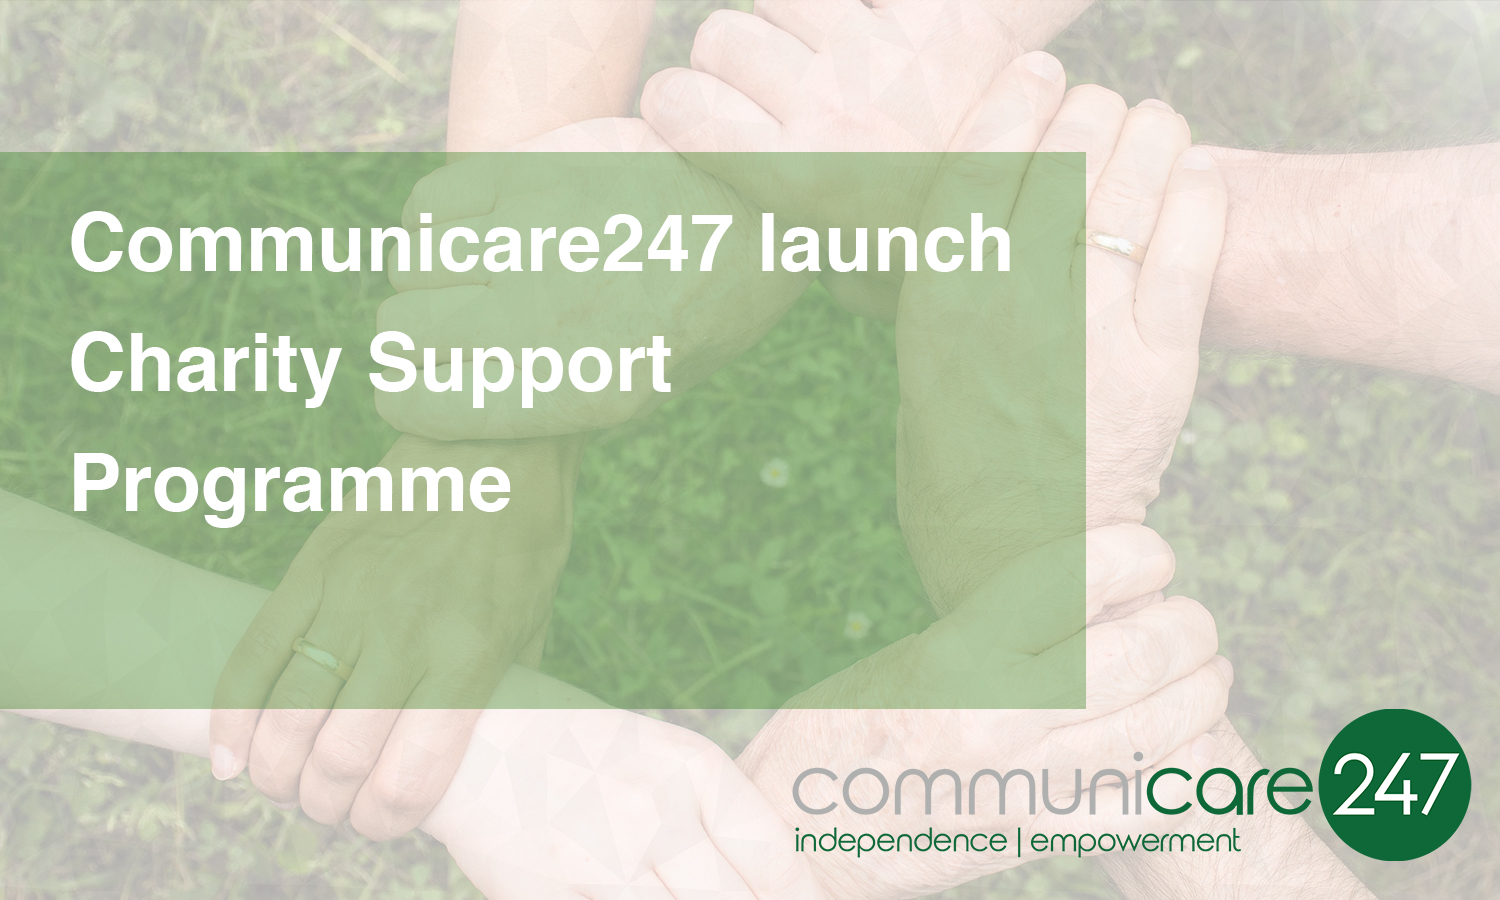 Communicare247 launch Charity Support Programme